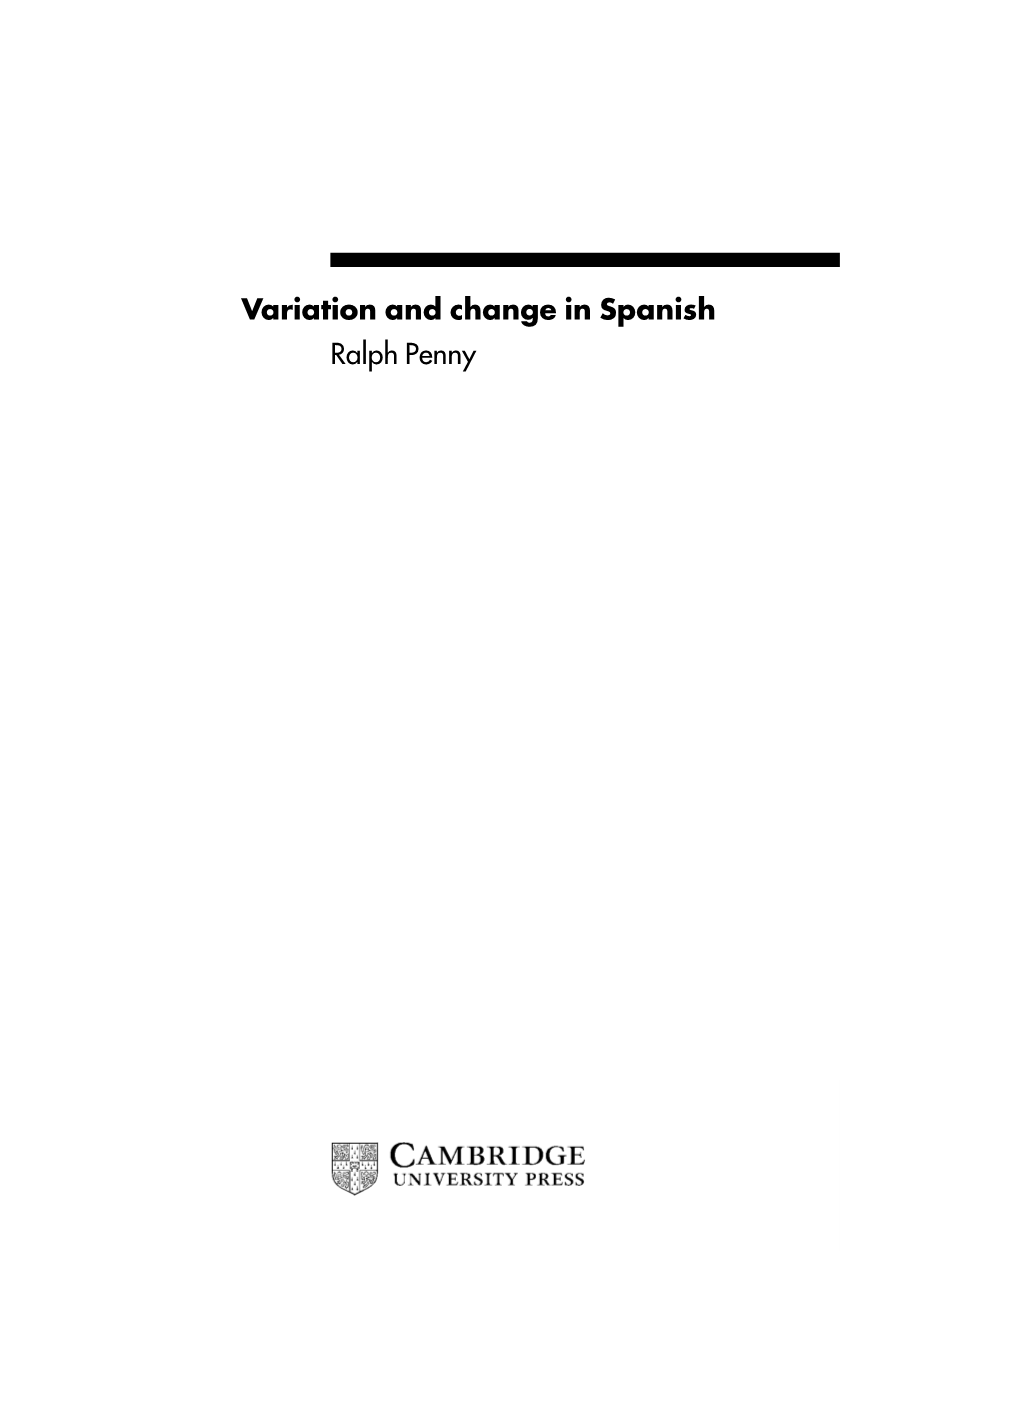 Variation and Change in Spanish Ralph Penny